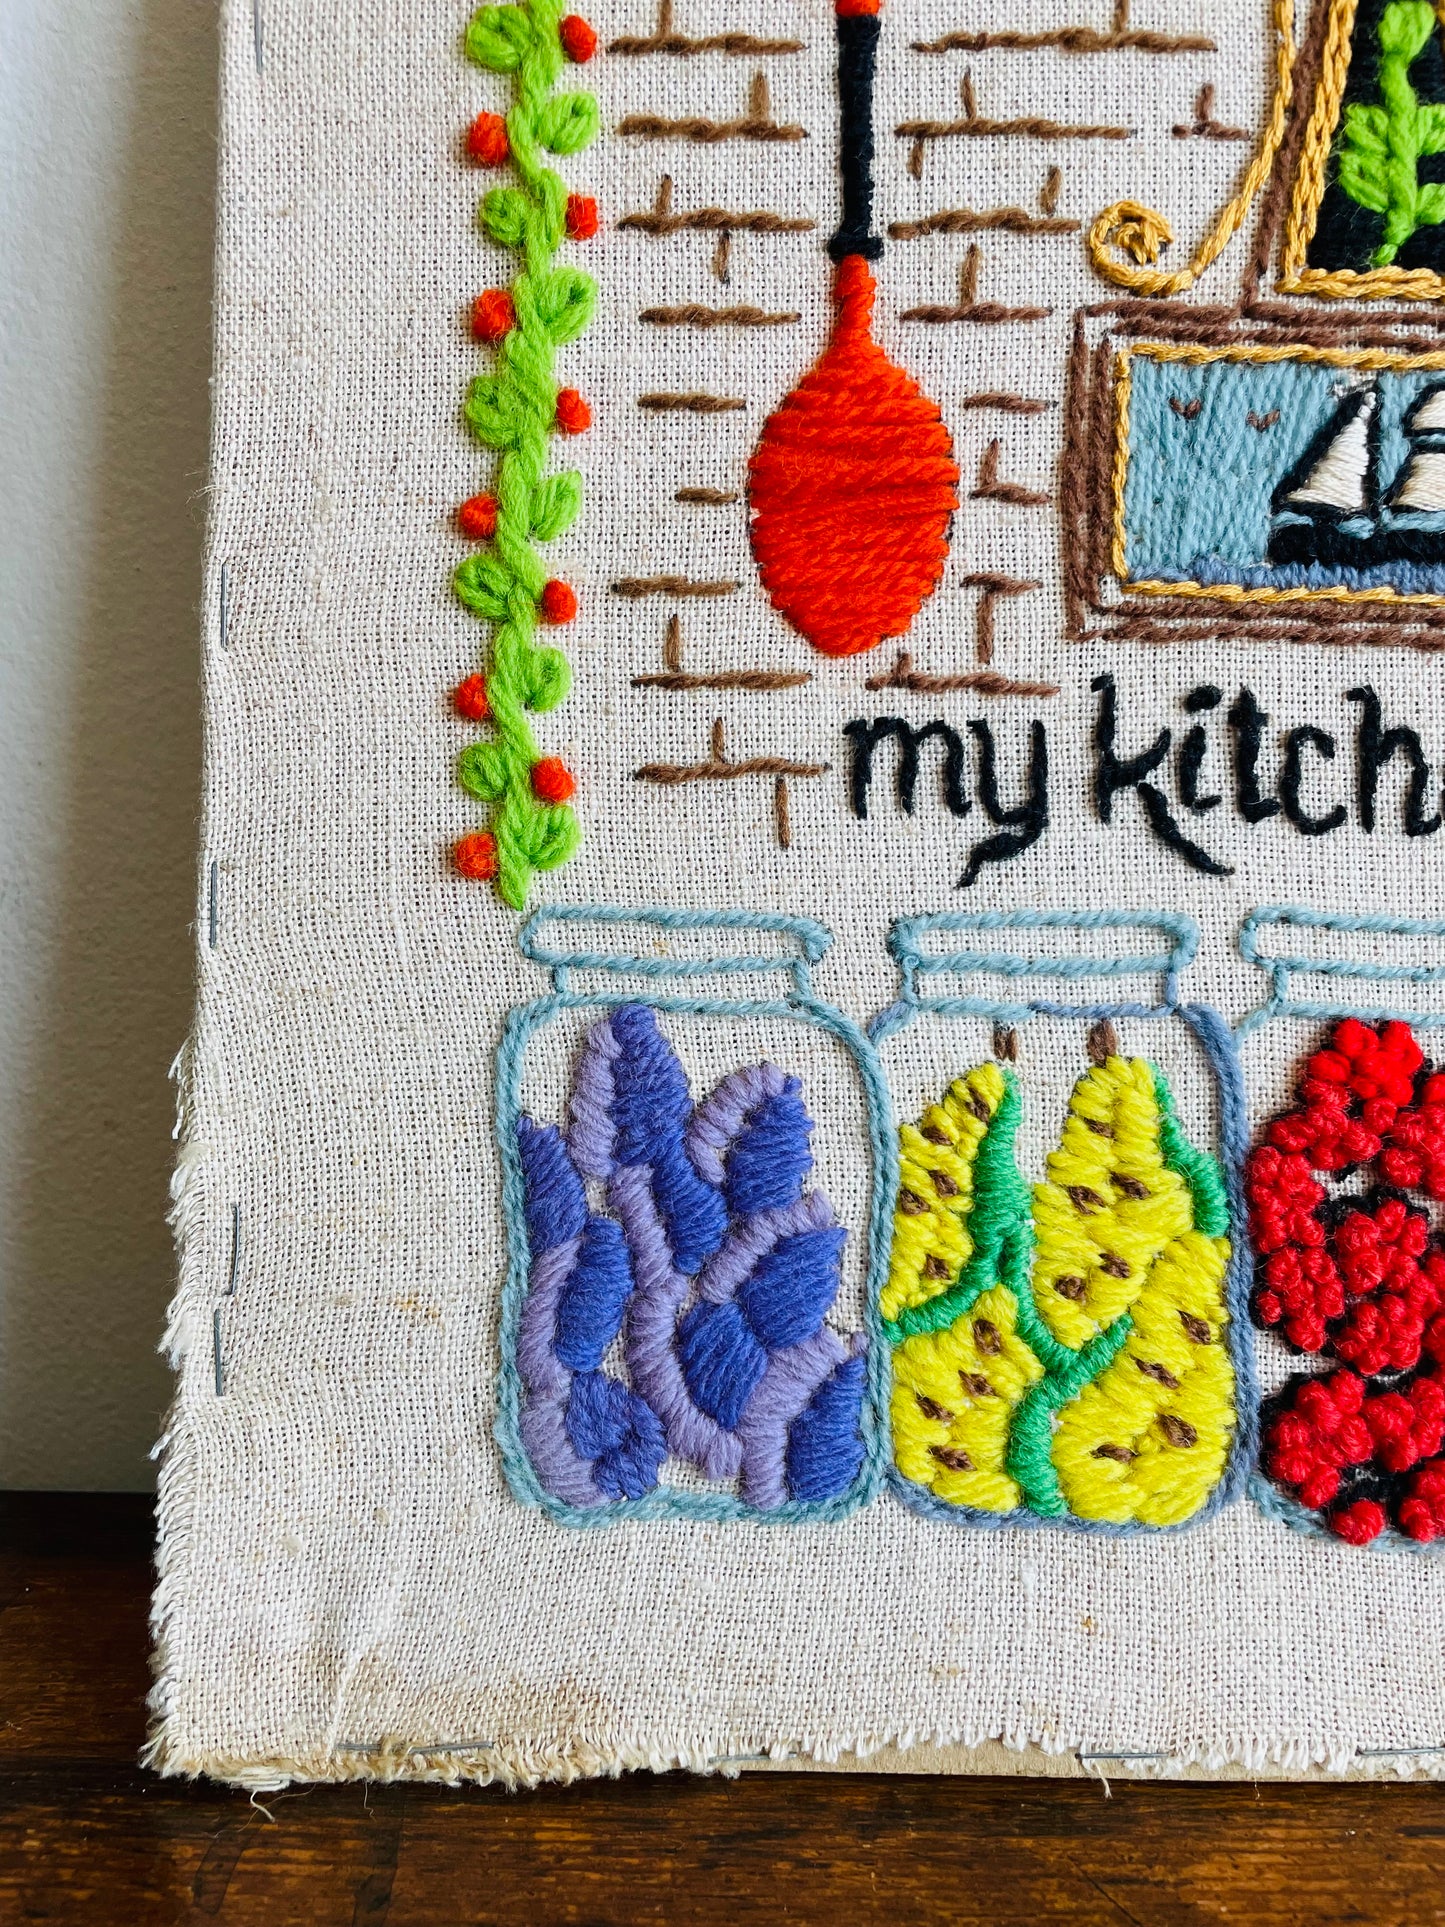 Adorable Crewel Embroidery Picture - No Matter Where I Serve My Guests It Seems They Like My Kitchen Best